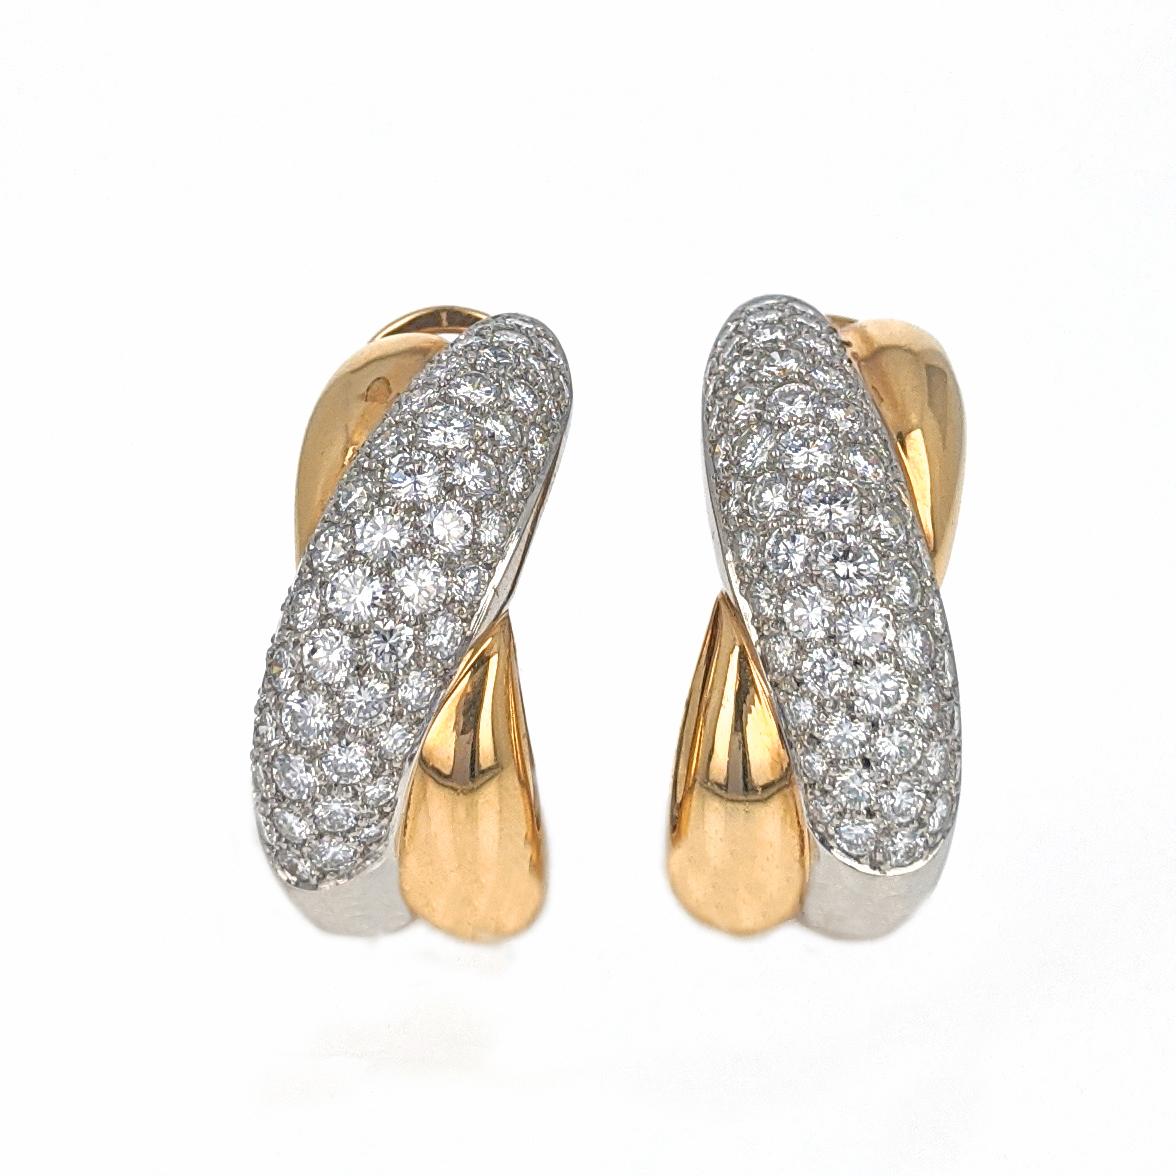 These clip earrings by Cartier France with cross over design feature 118 round brilliant cut diamonds of E/F color and VS clarity with a total approximate weight of 4.5 carats. The earrings are mounted in platinum and 18 karat yellow gold. Each is